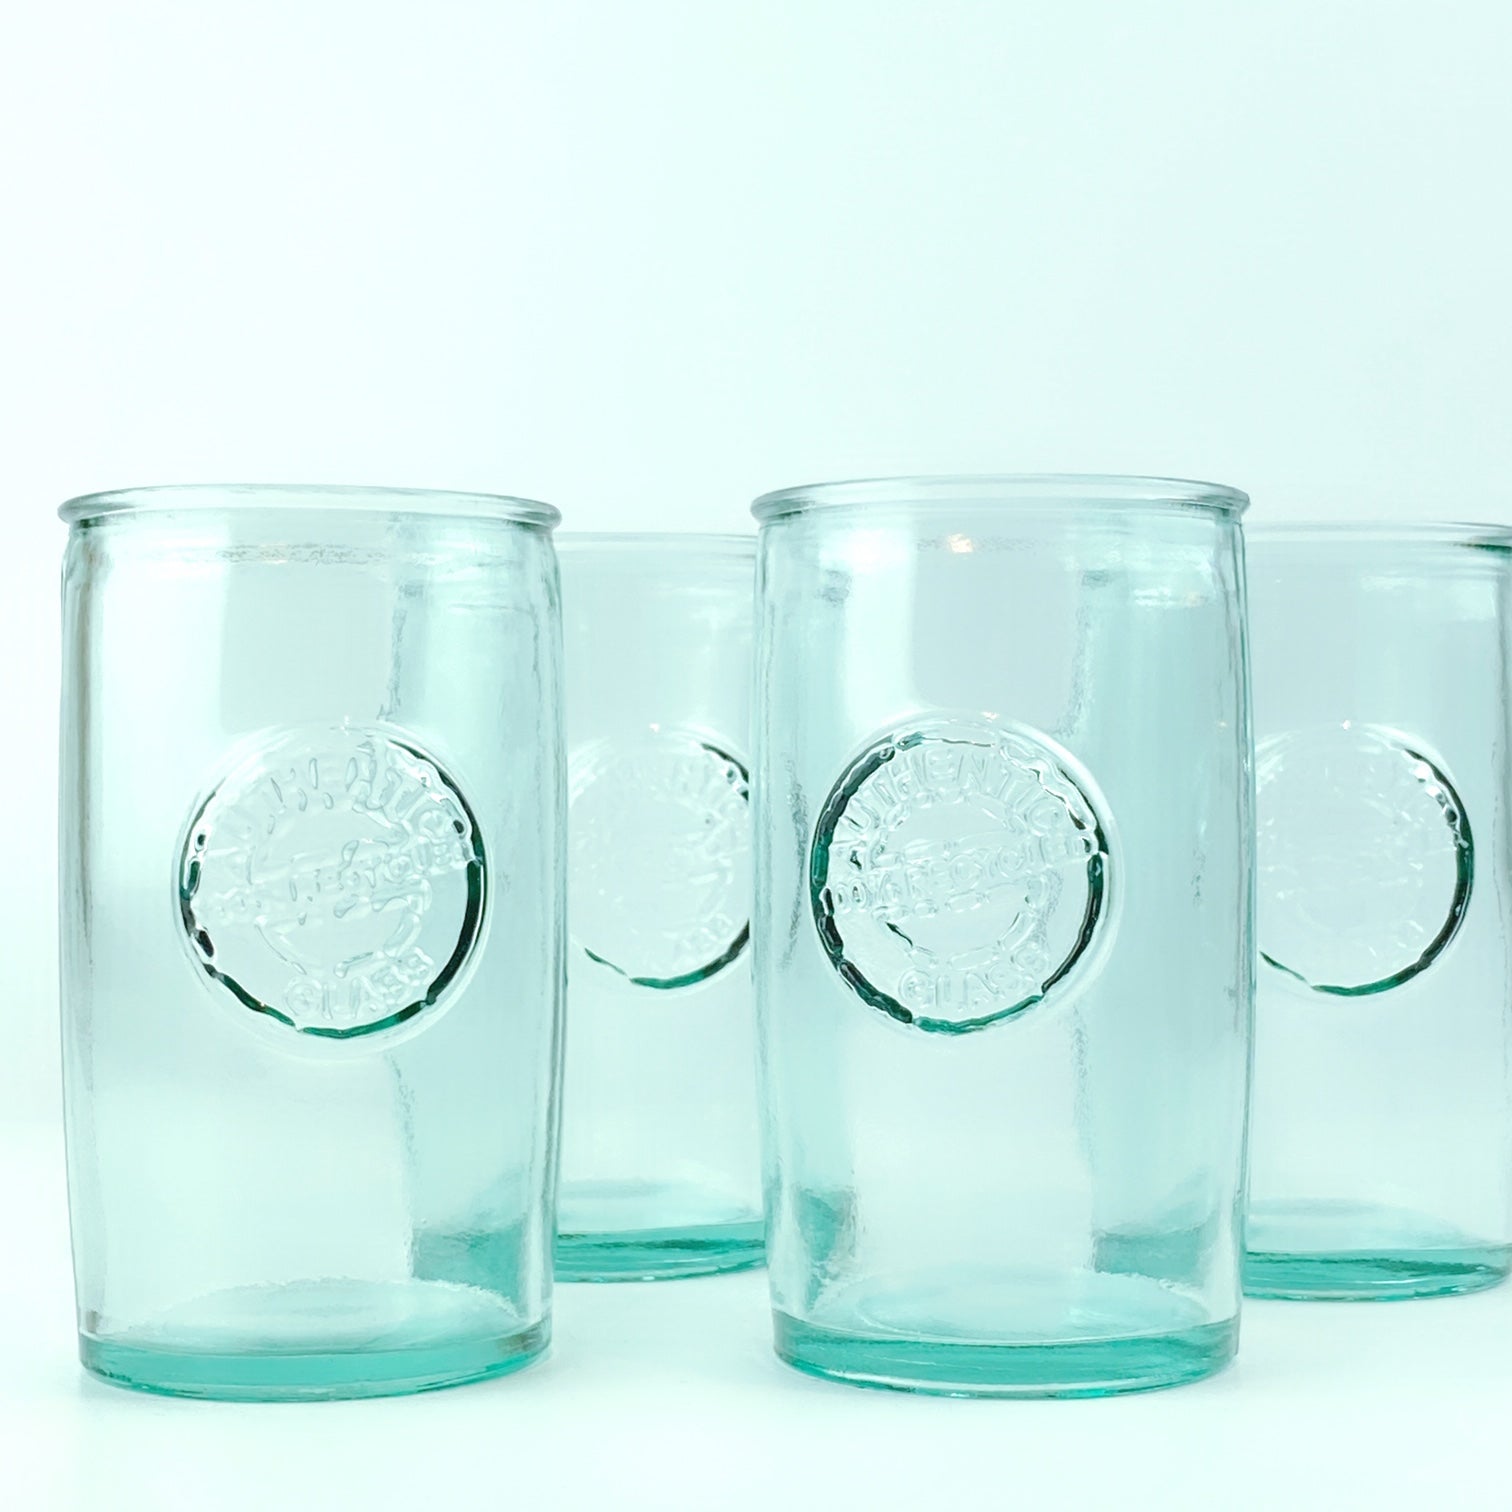 Recycled Wine Bottle Tall Drinking Glasses in Aqua - 16 oz. (Set of 4)